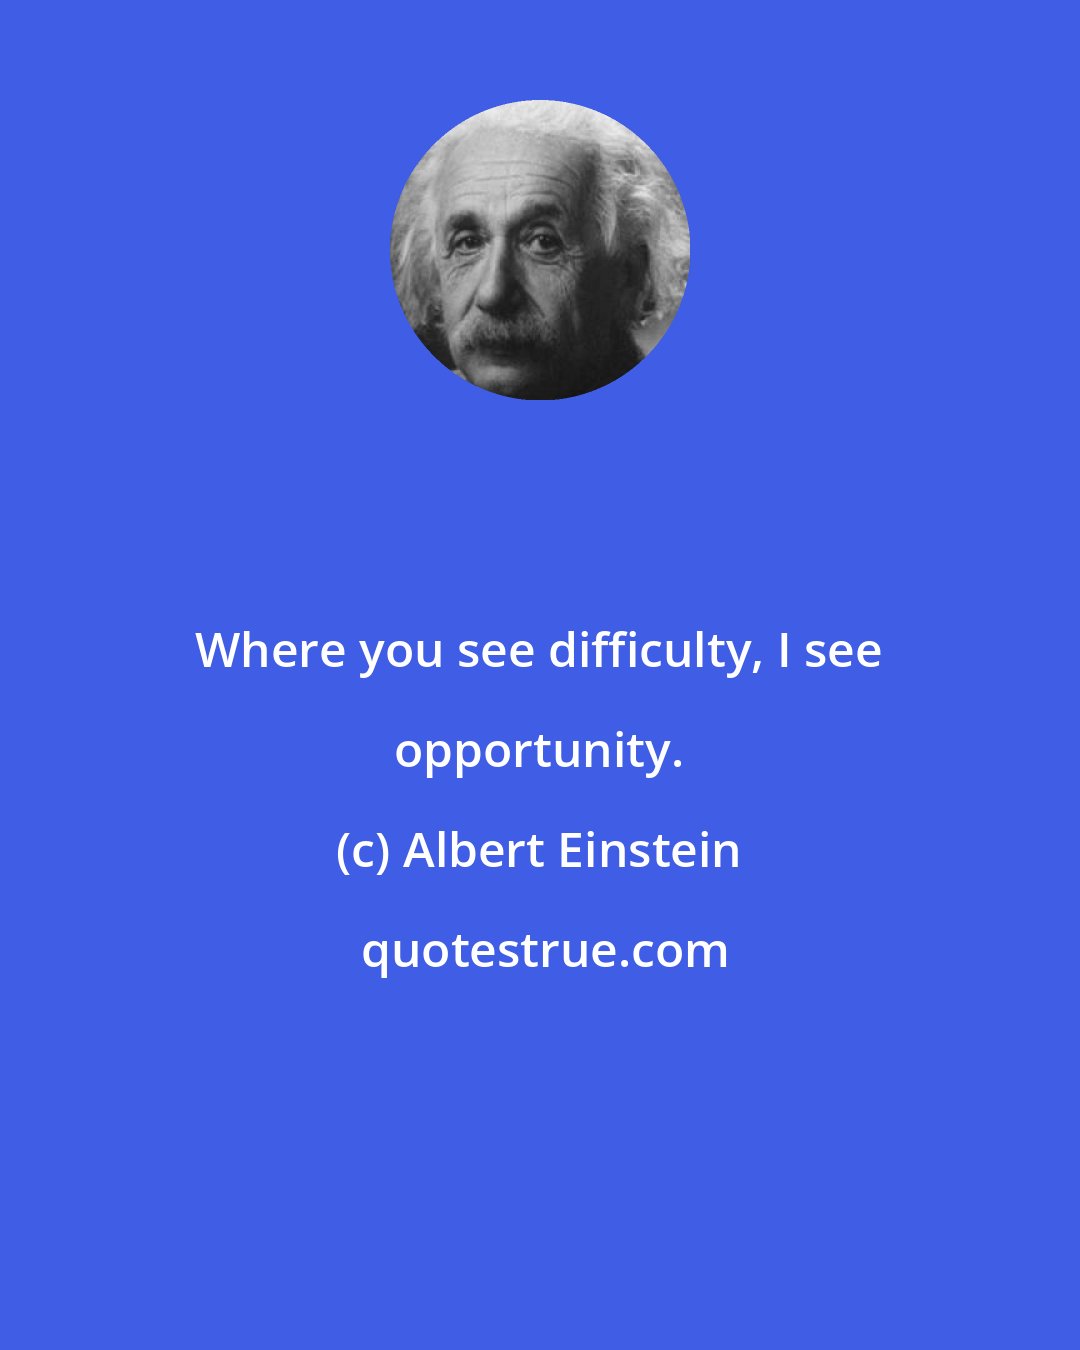 Albert Einstein: Where you see difficulty, I see opportunity.